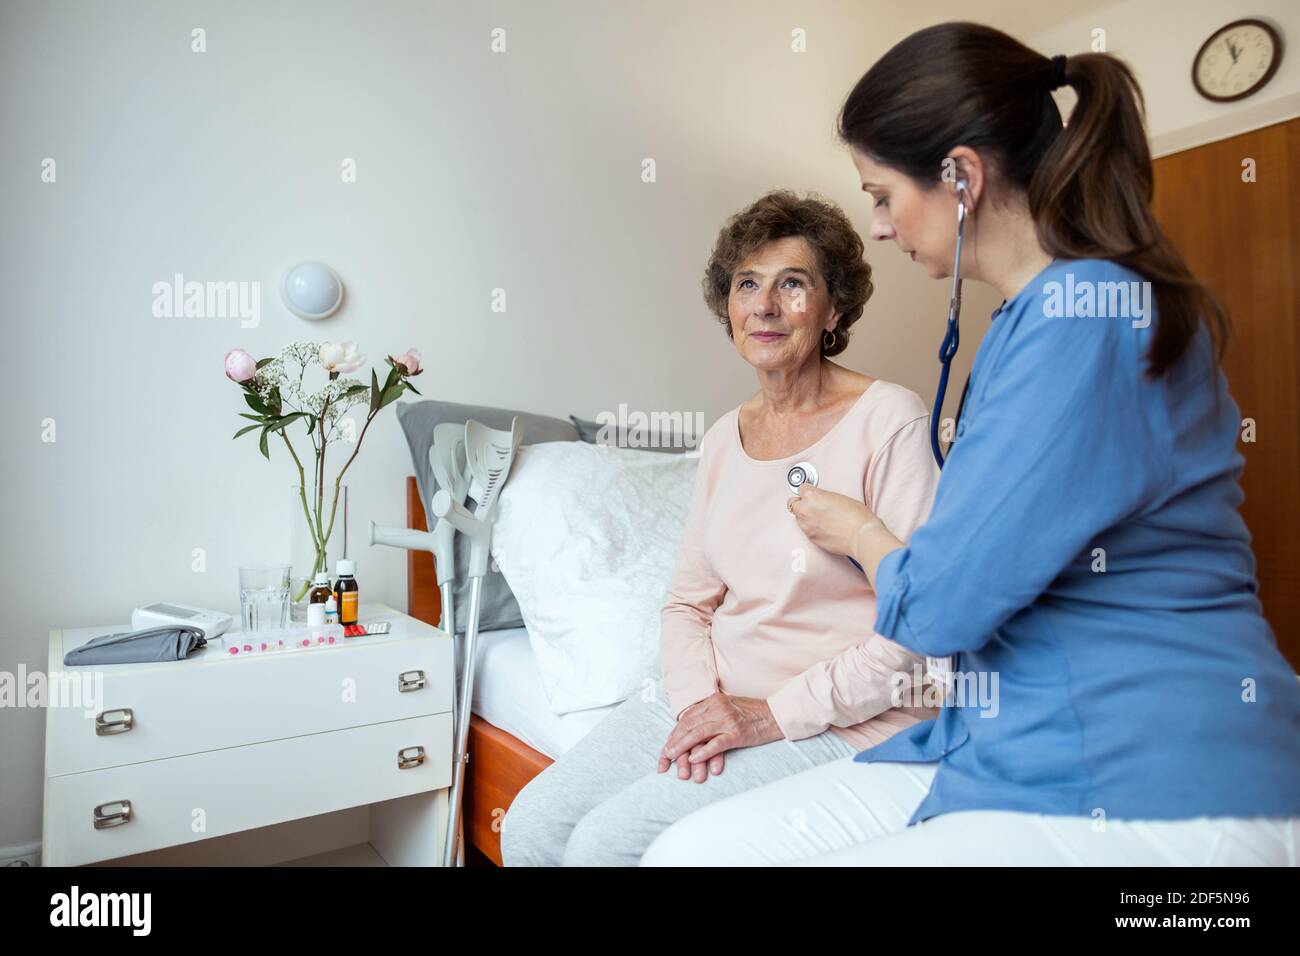 Female Doctor Listening to Lungs of Senior Patient With Stethoscope in Hospital Room. Home Nurse Listening For Breathing of Elderly Woman. Stock Photo